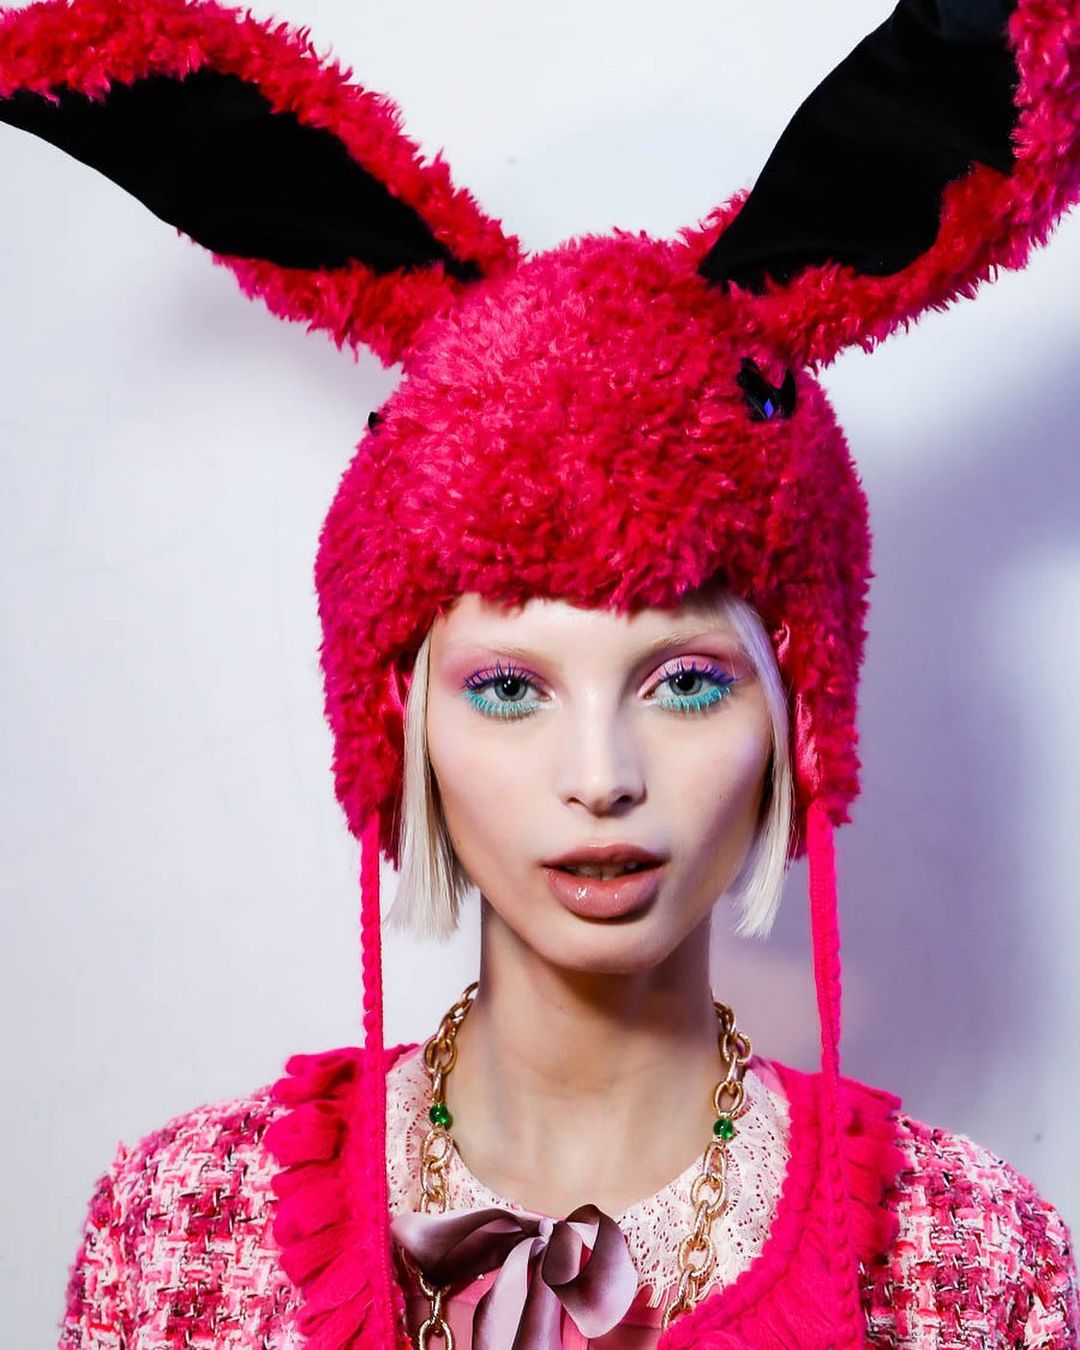 Woman with pink bunny ears